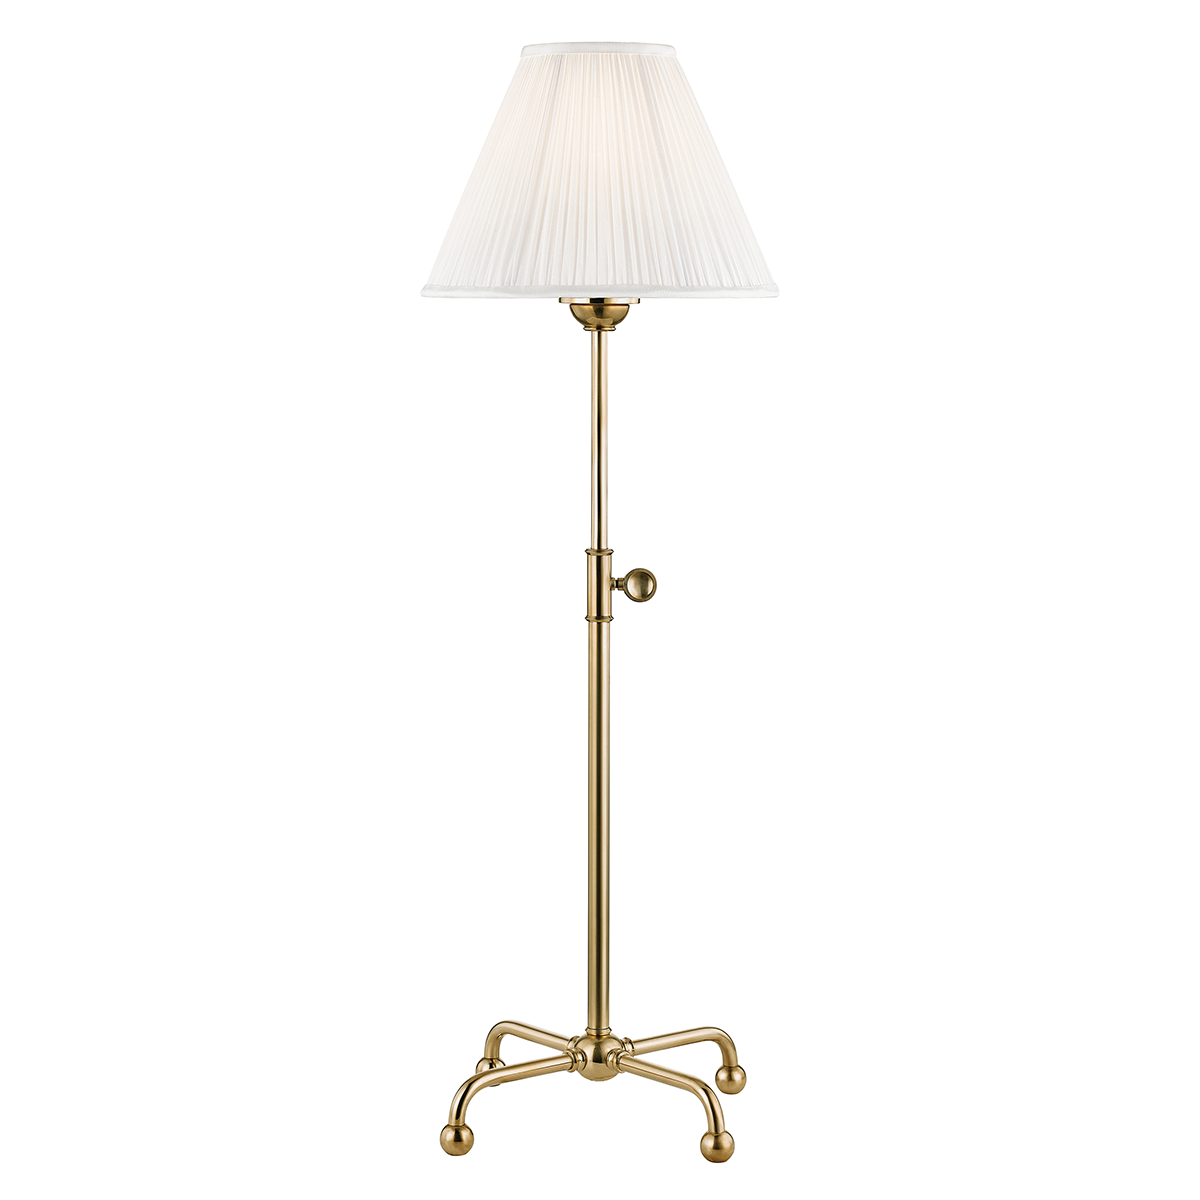 Hudson Valley Lighting Classic No.1 Table Lamp